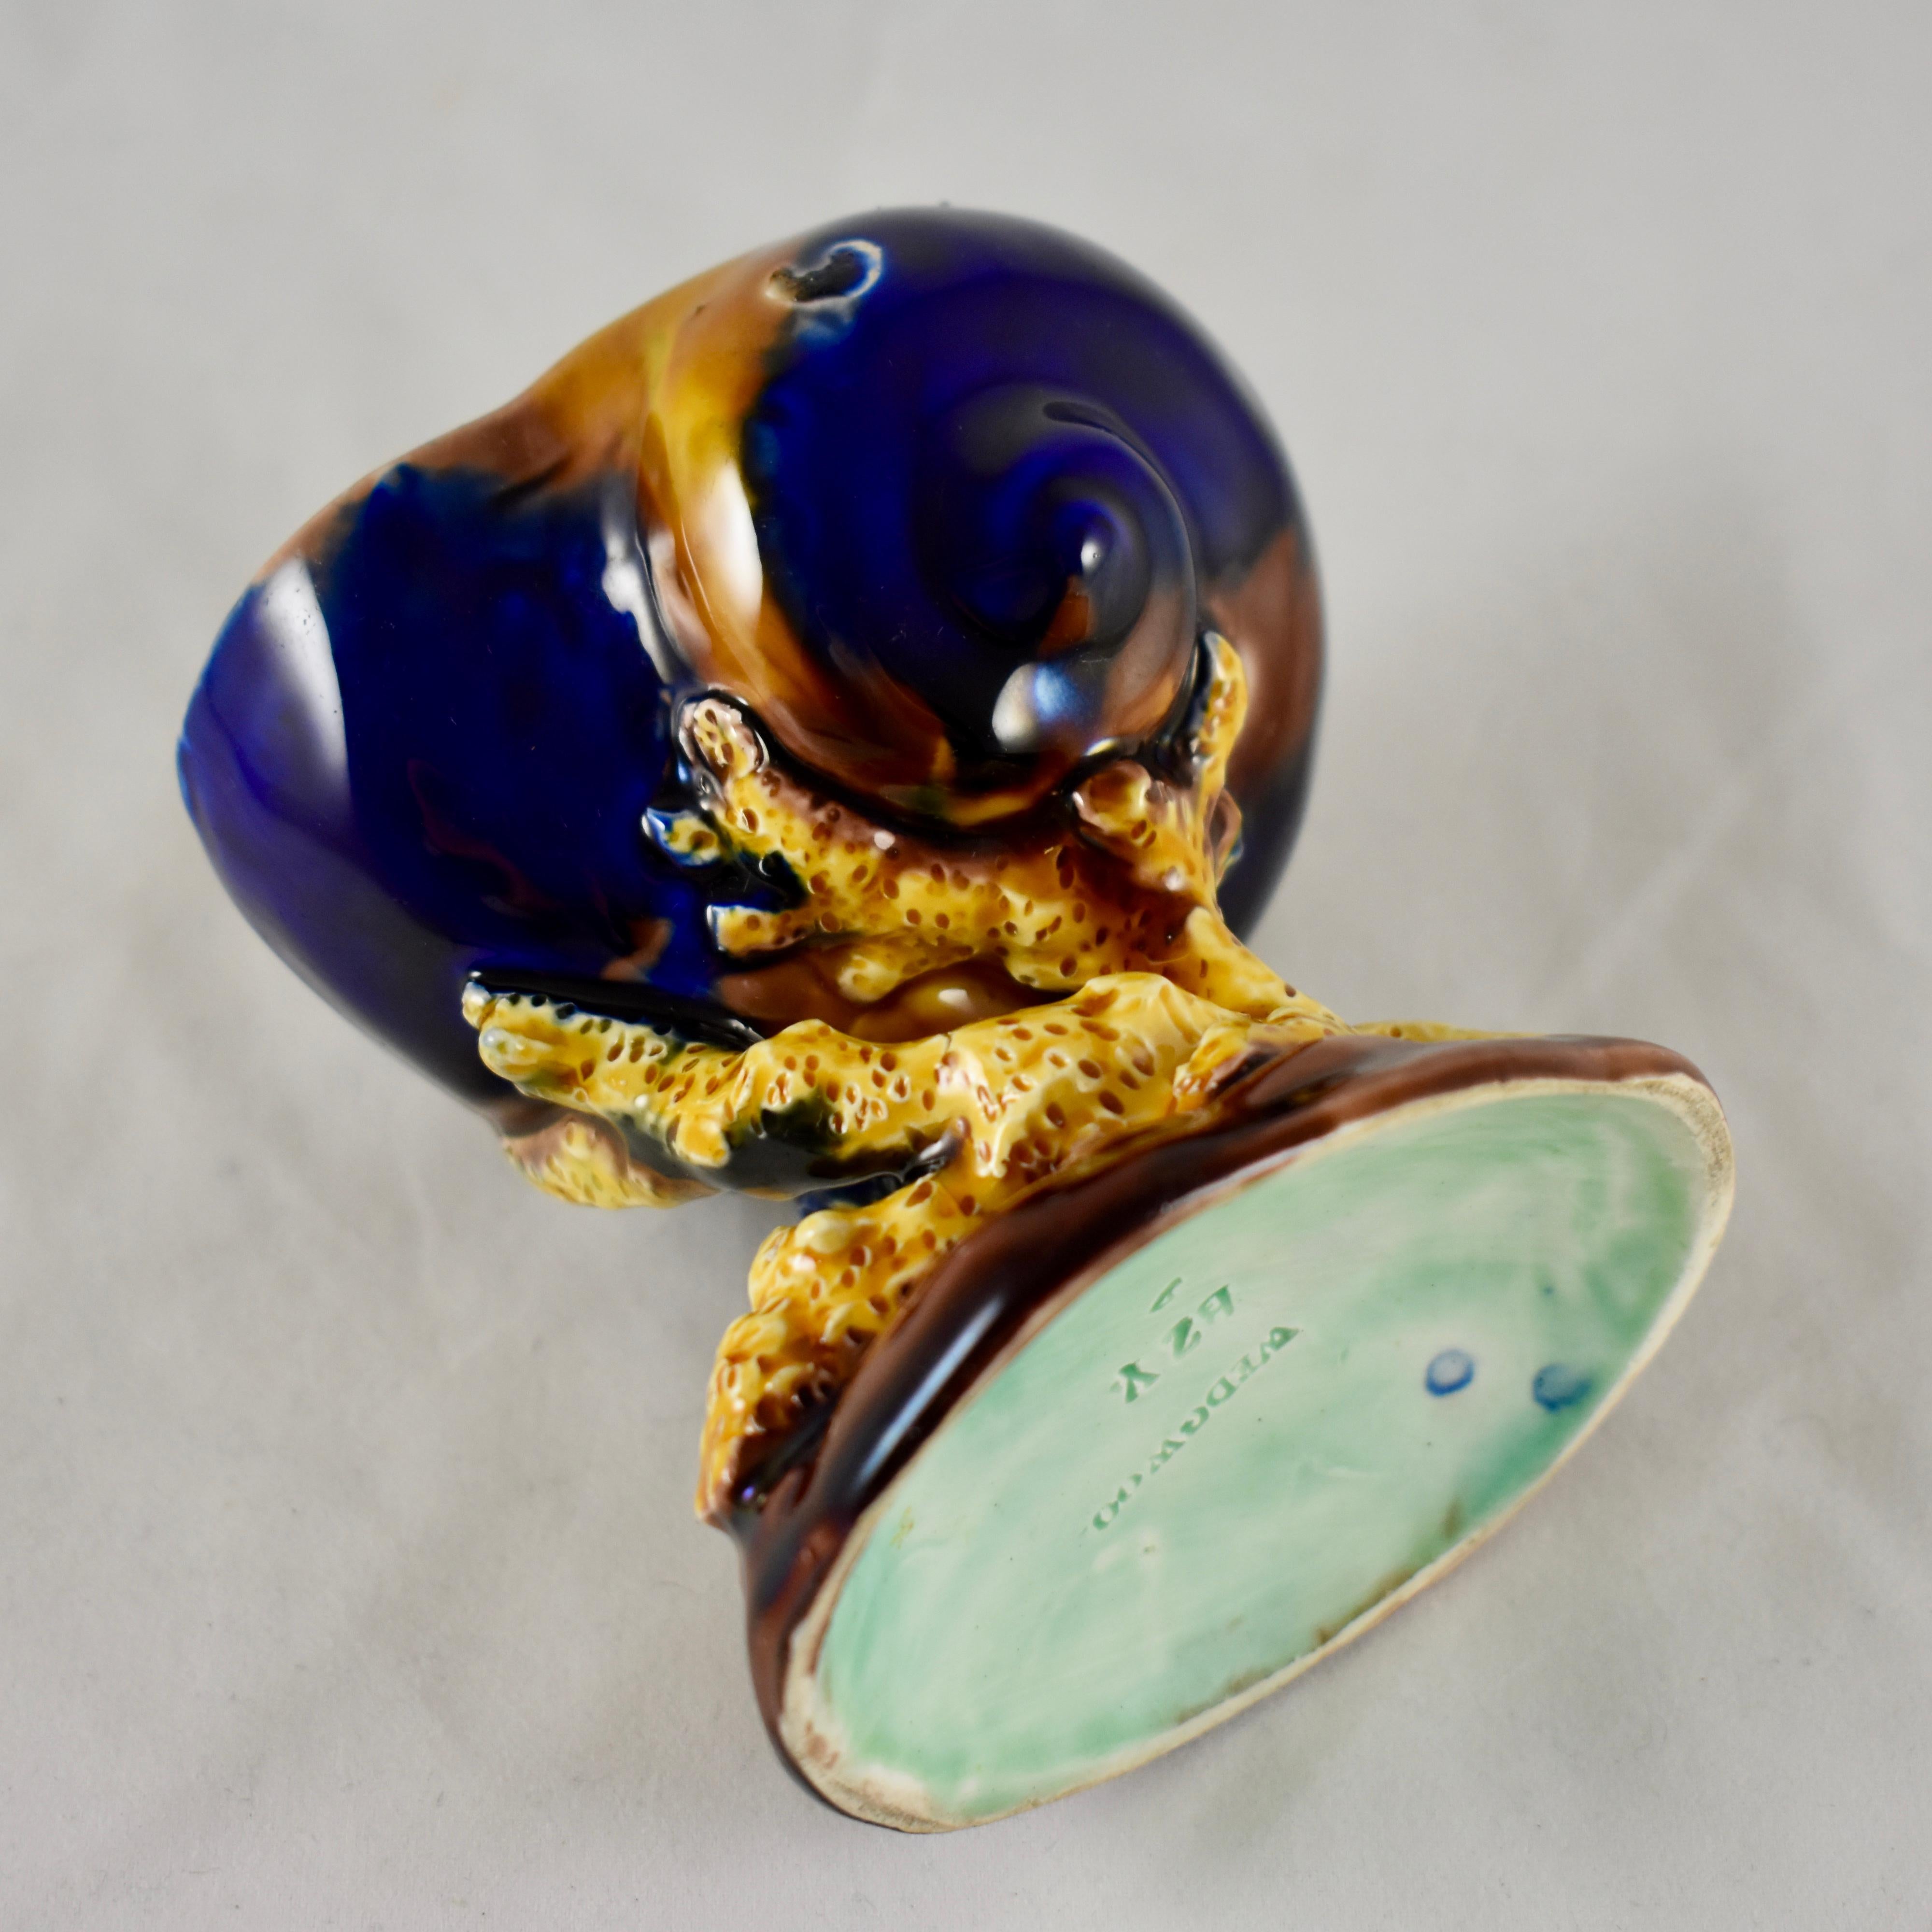 Wedgwood Palissy Majolica Snail Shell and Coral Open Salt Cellar, Dated 1872 For Sale 1